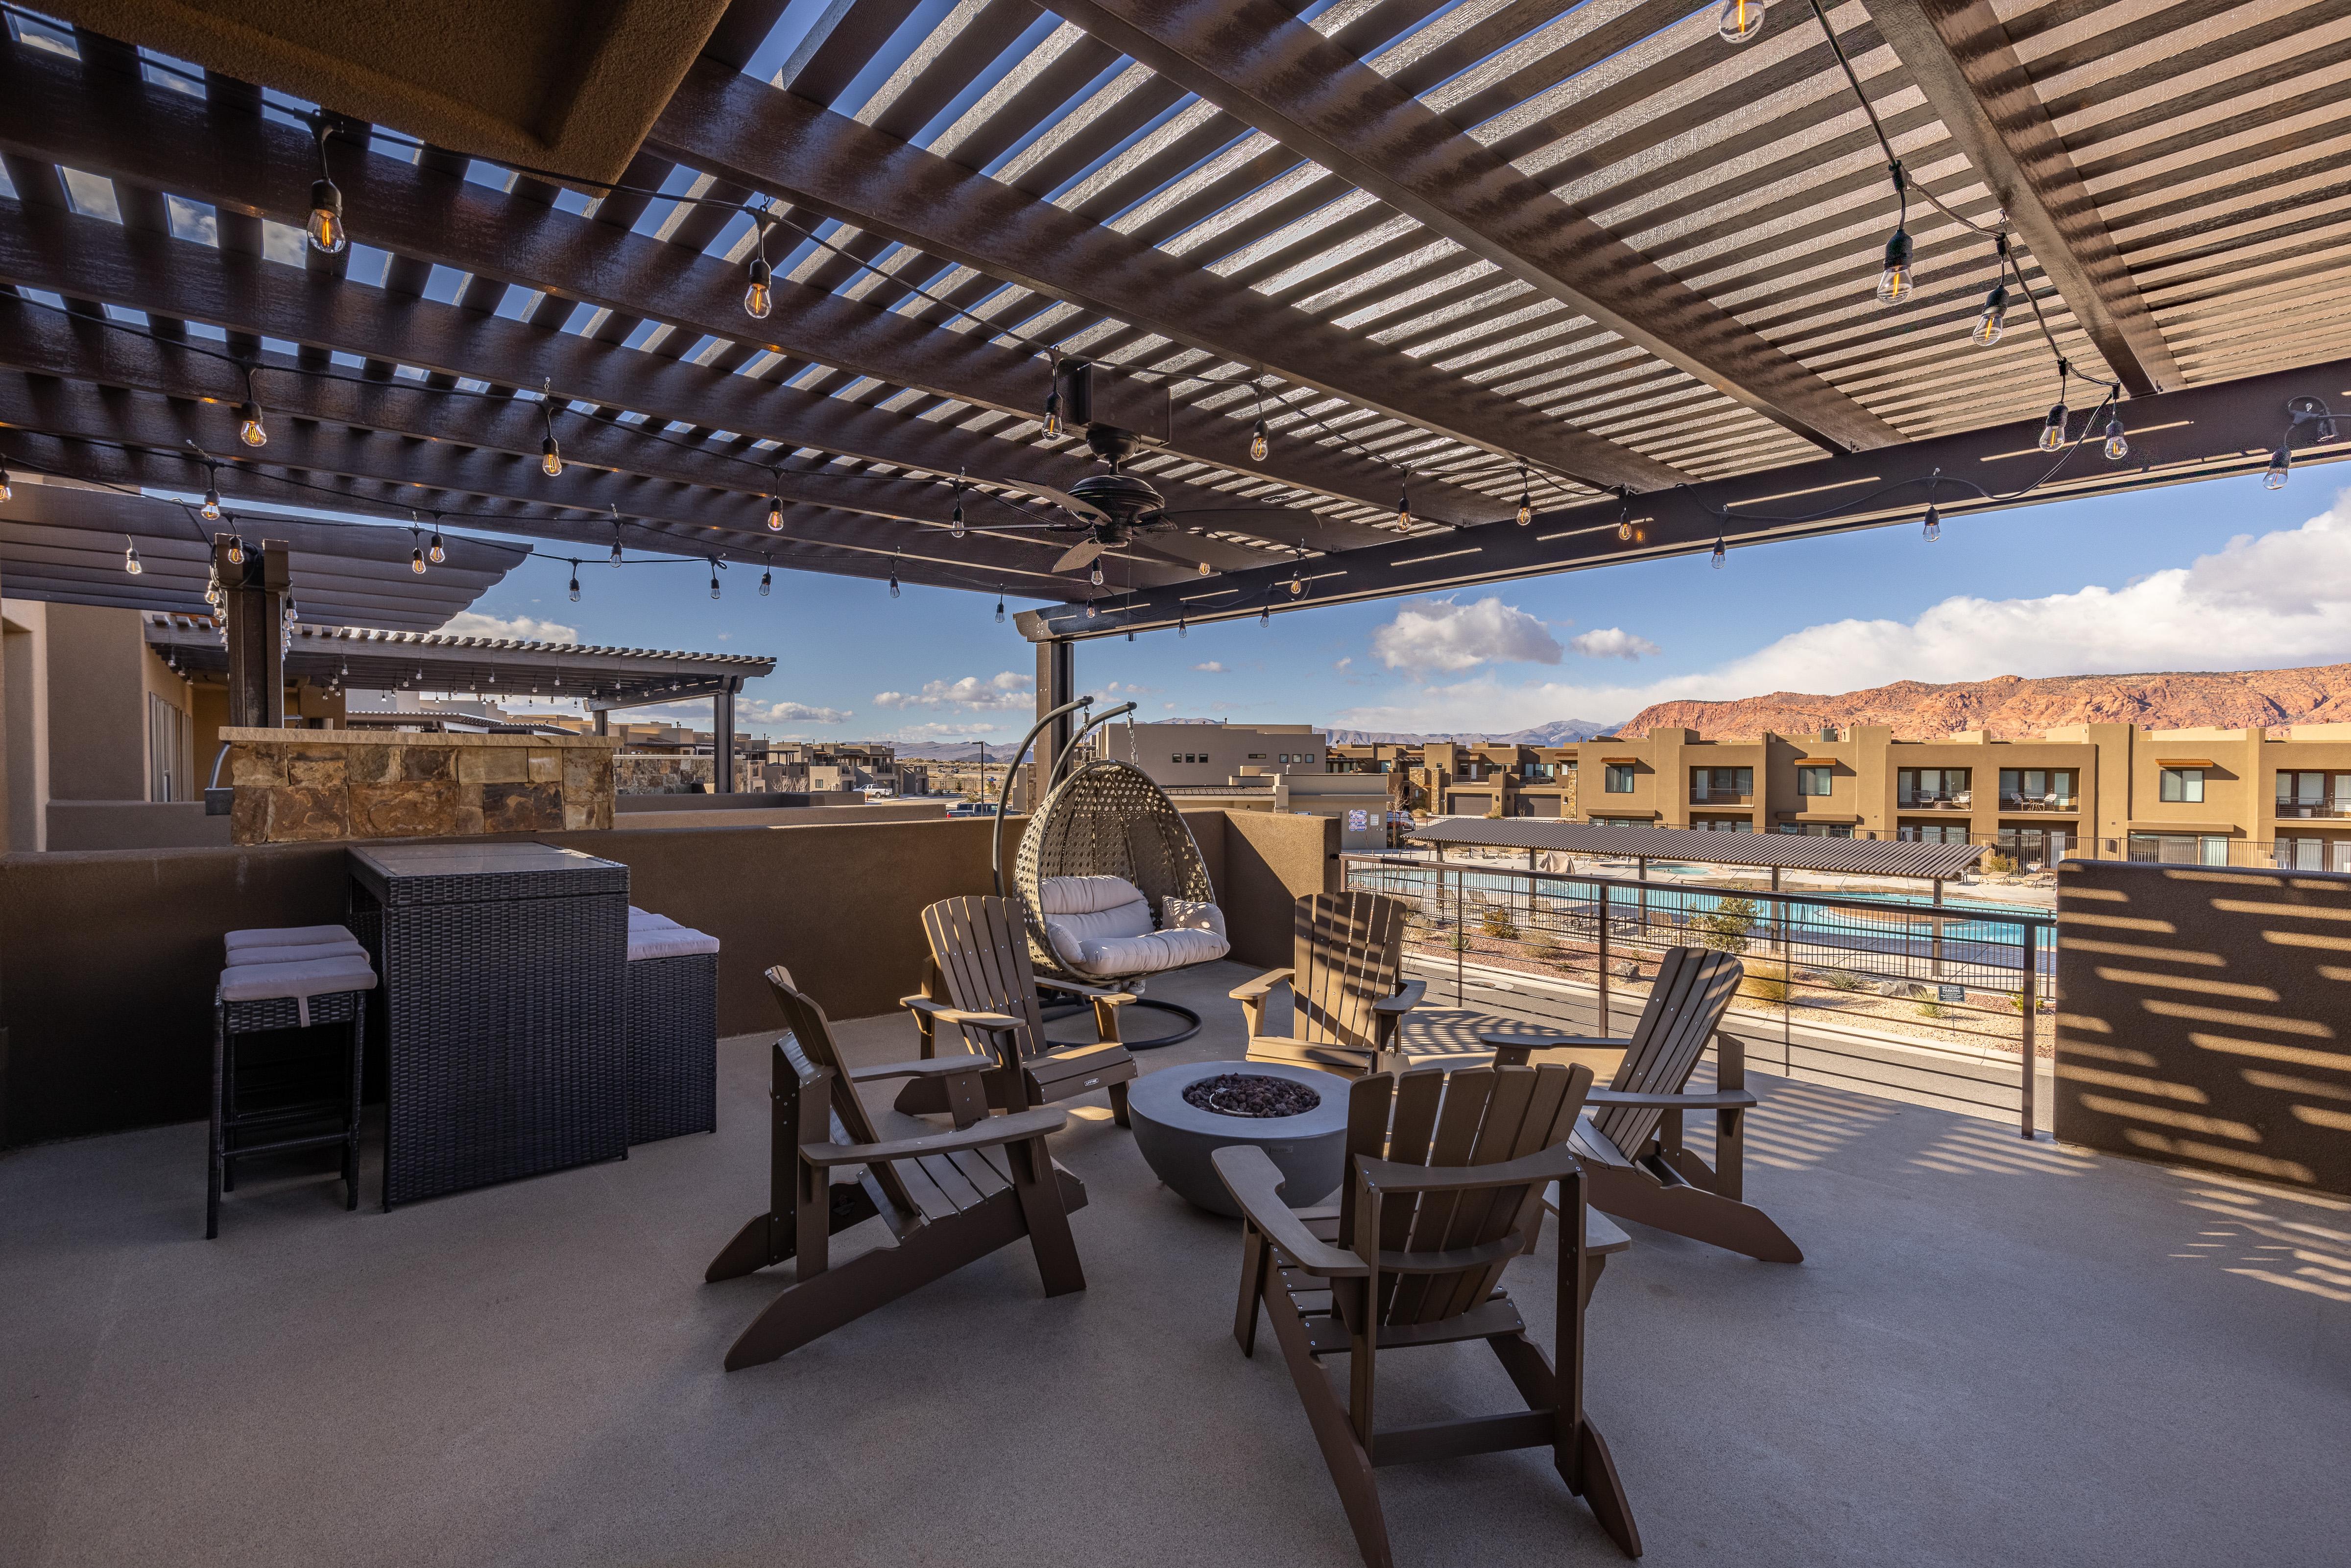 Read a book and enjoy the weather while you lounge around in the comfort on the upstairs patio area.